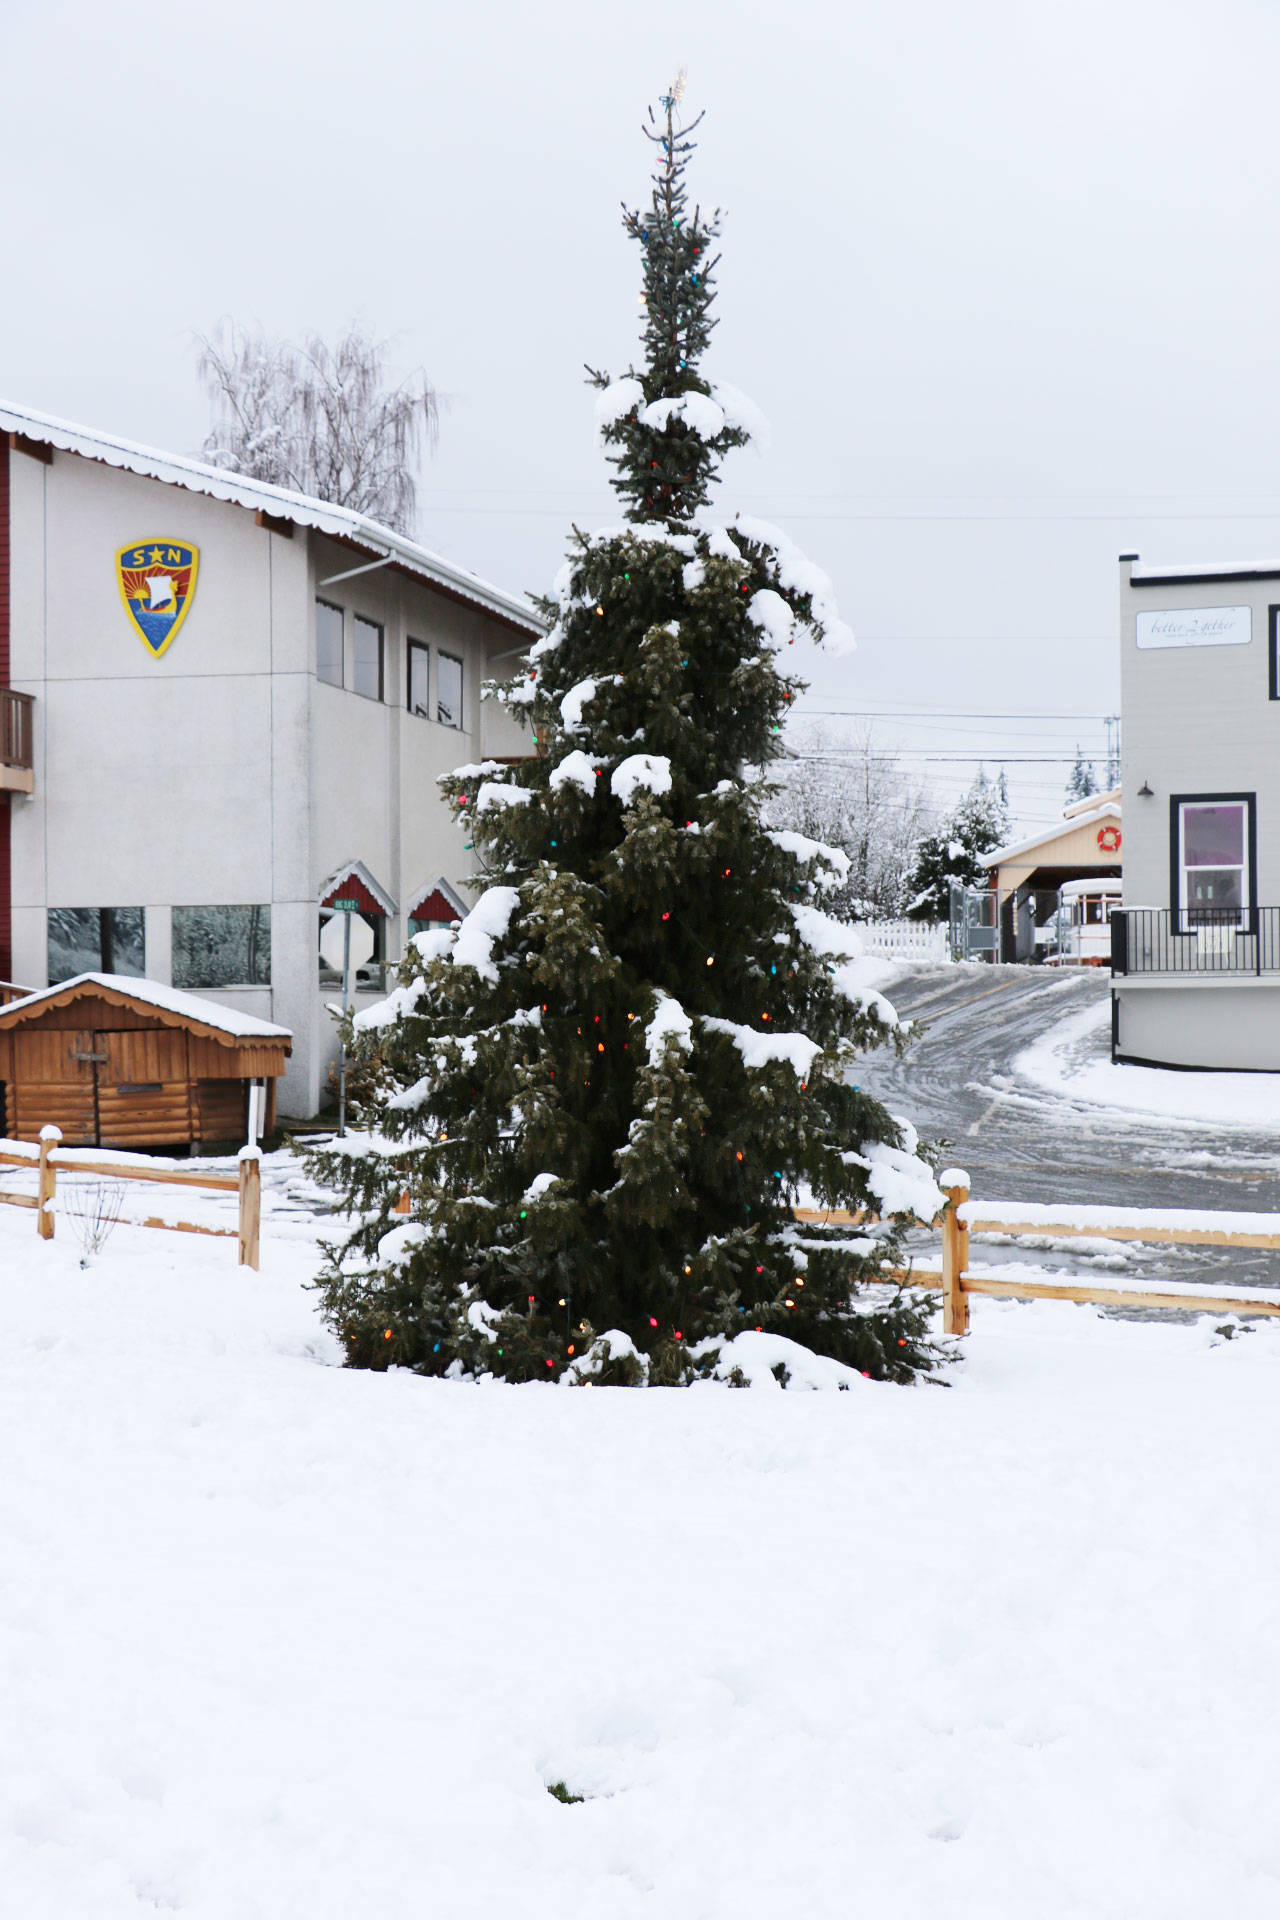 The holidays may be over but the lights on Poulsbo’s Christmas tree still shine bright.